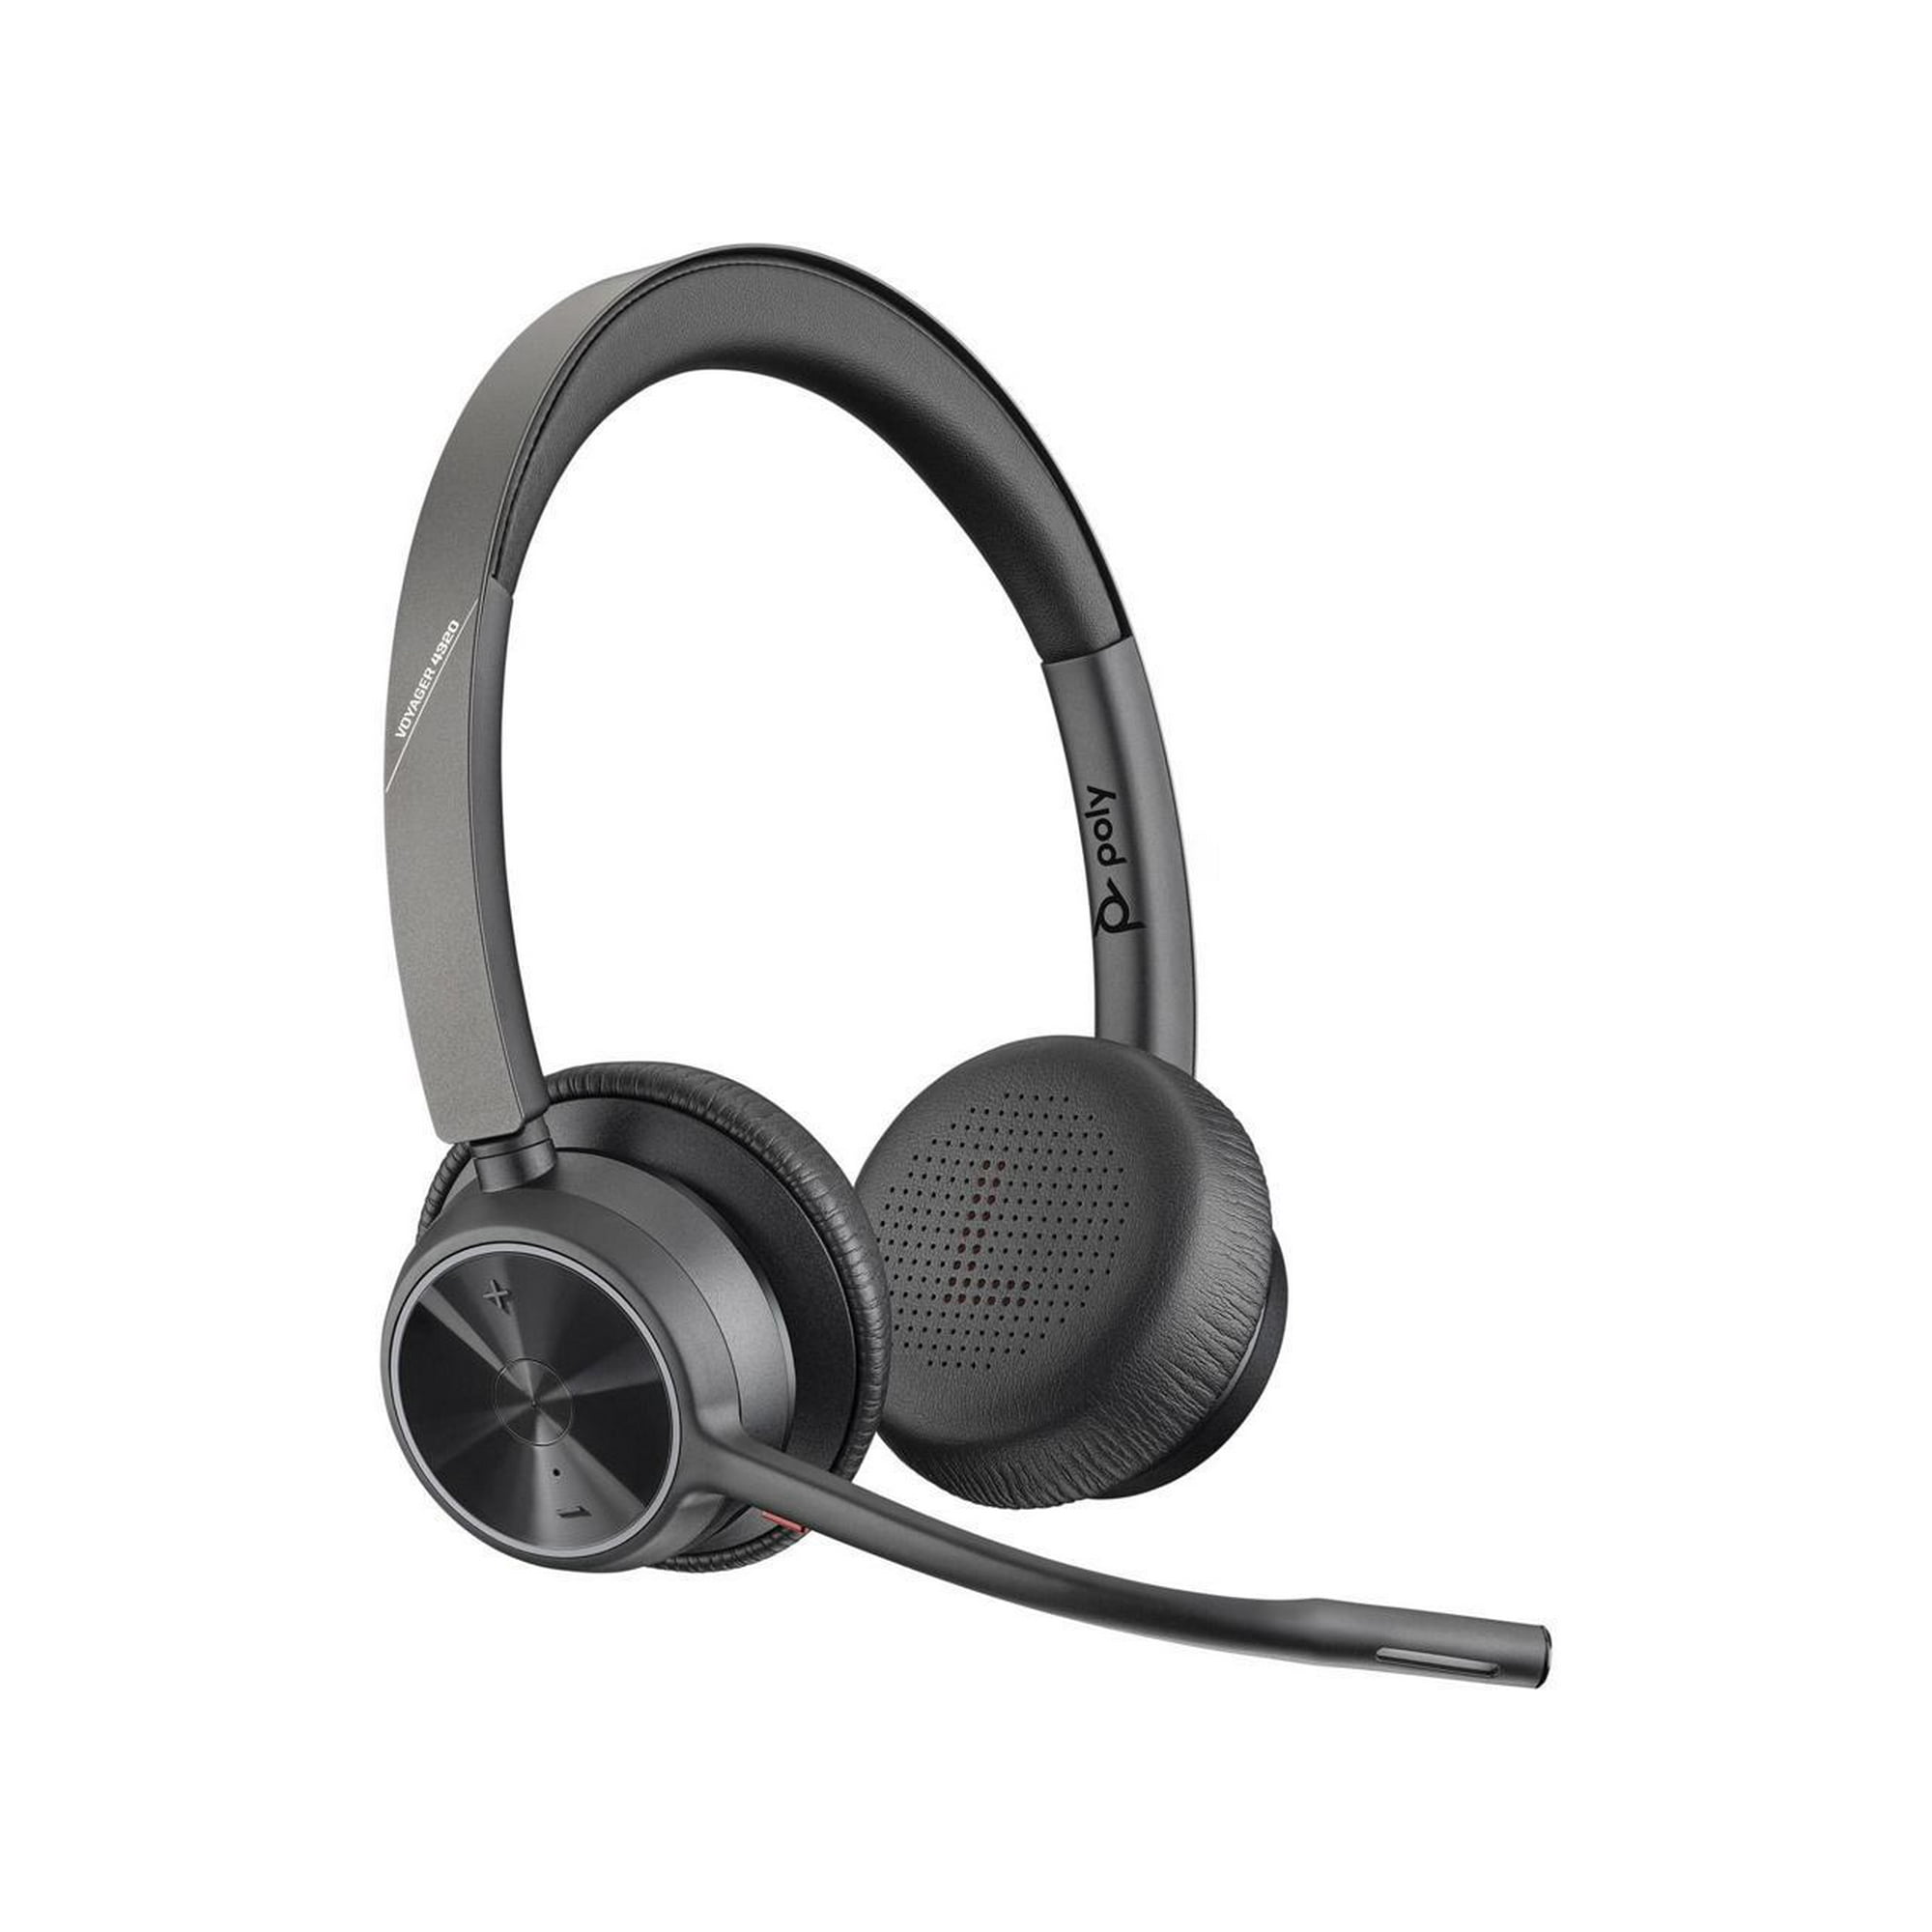 Poly - Voyager 4320 Wireless Headset (Plantronics) - Headphones with Boom Mic - Connect to PC/Mac via USB-A Bluetooth Adapter, Cell Phone via Bluetooth - Works with (Certified), Zoom &